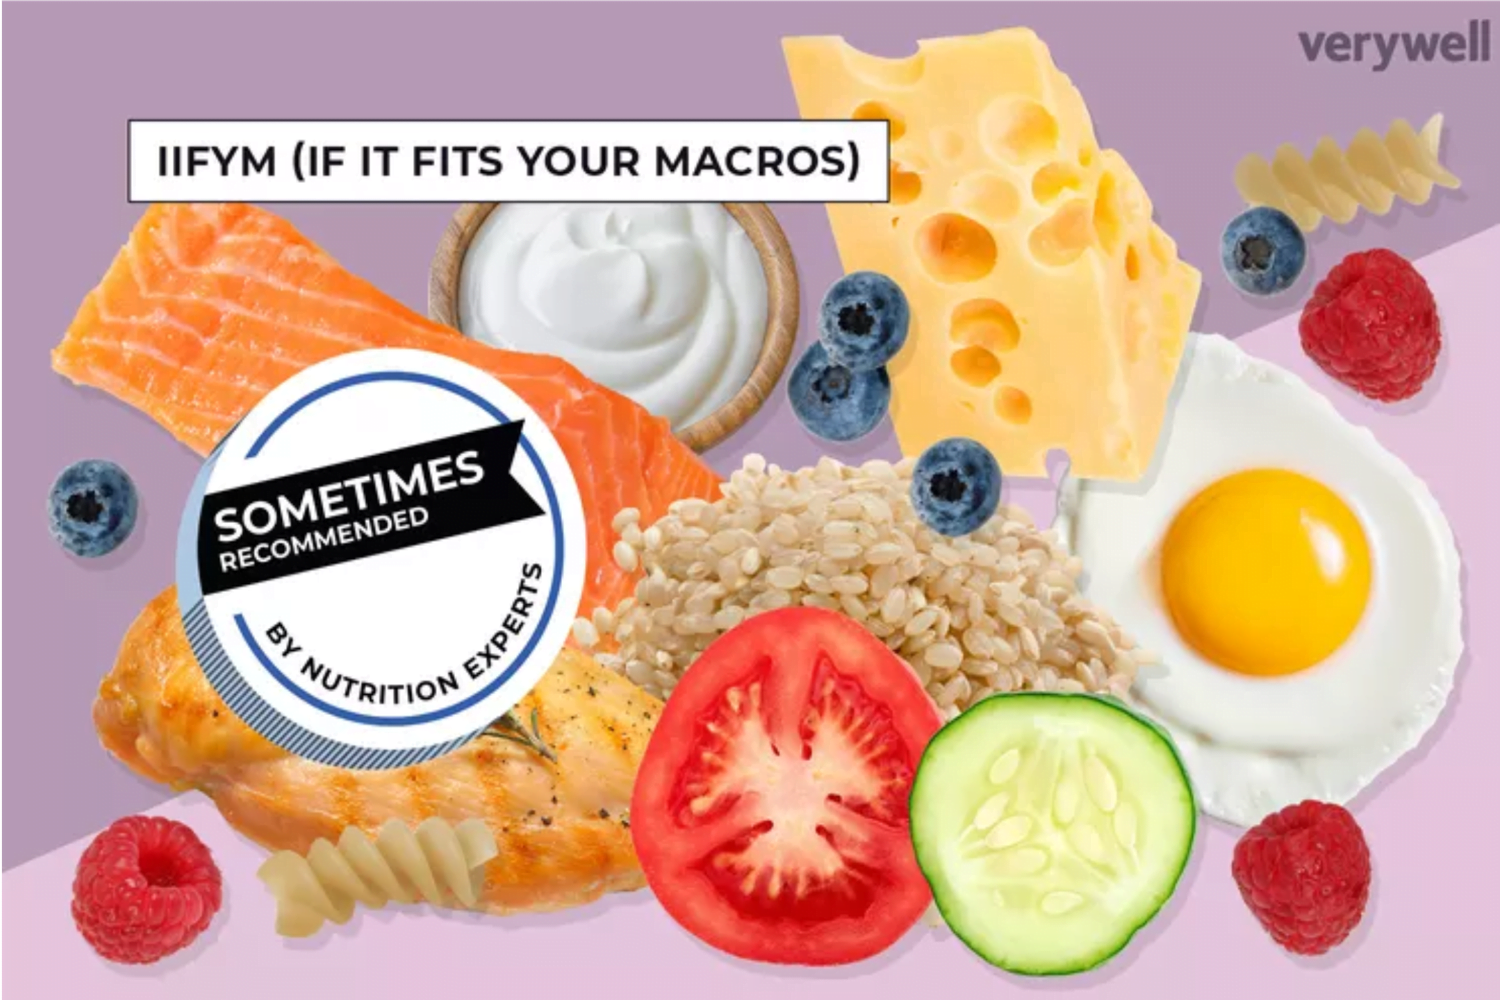 What is the ‘If It Fits Your Macros’ (IIFYM) Diet?